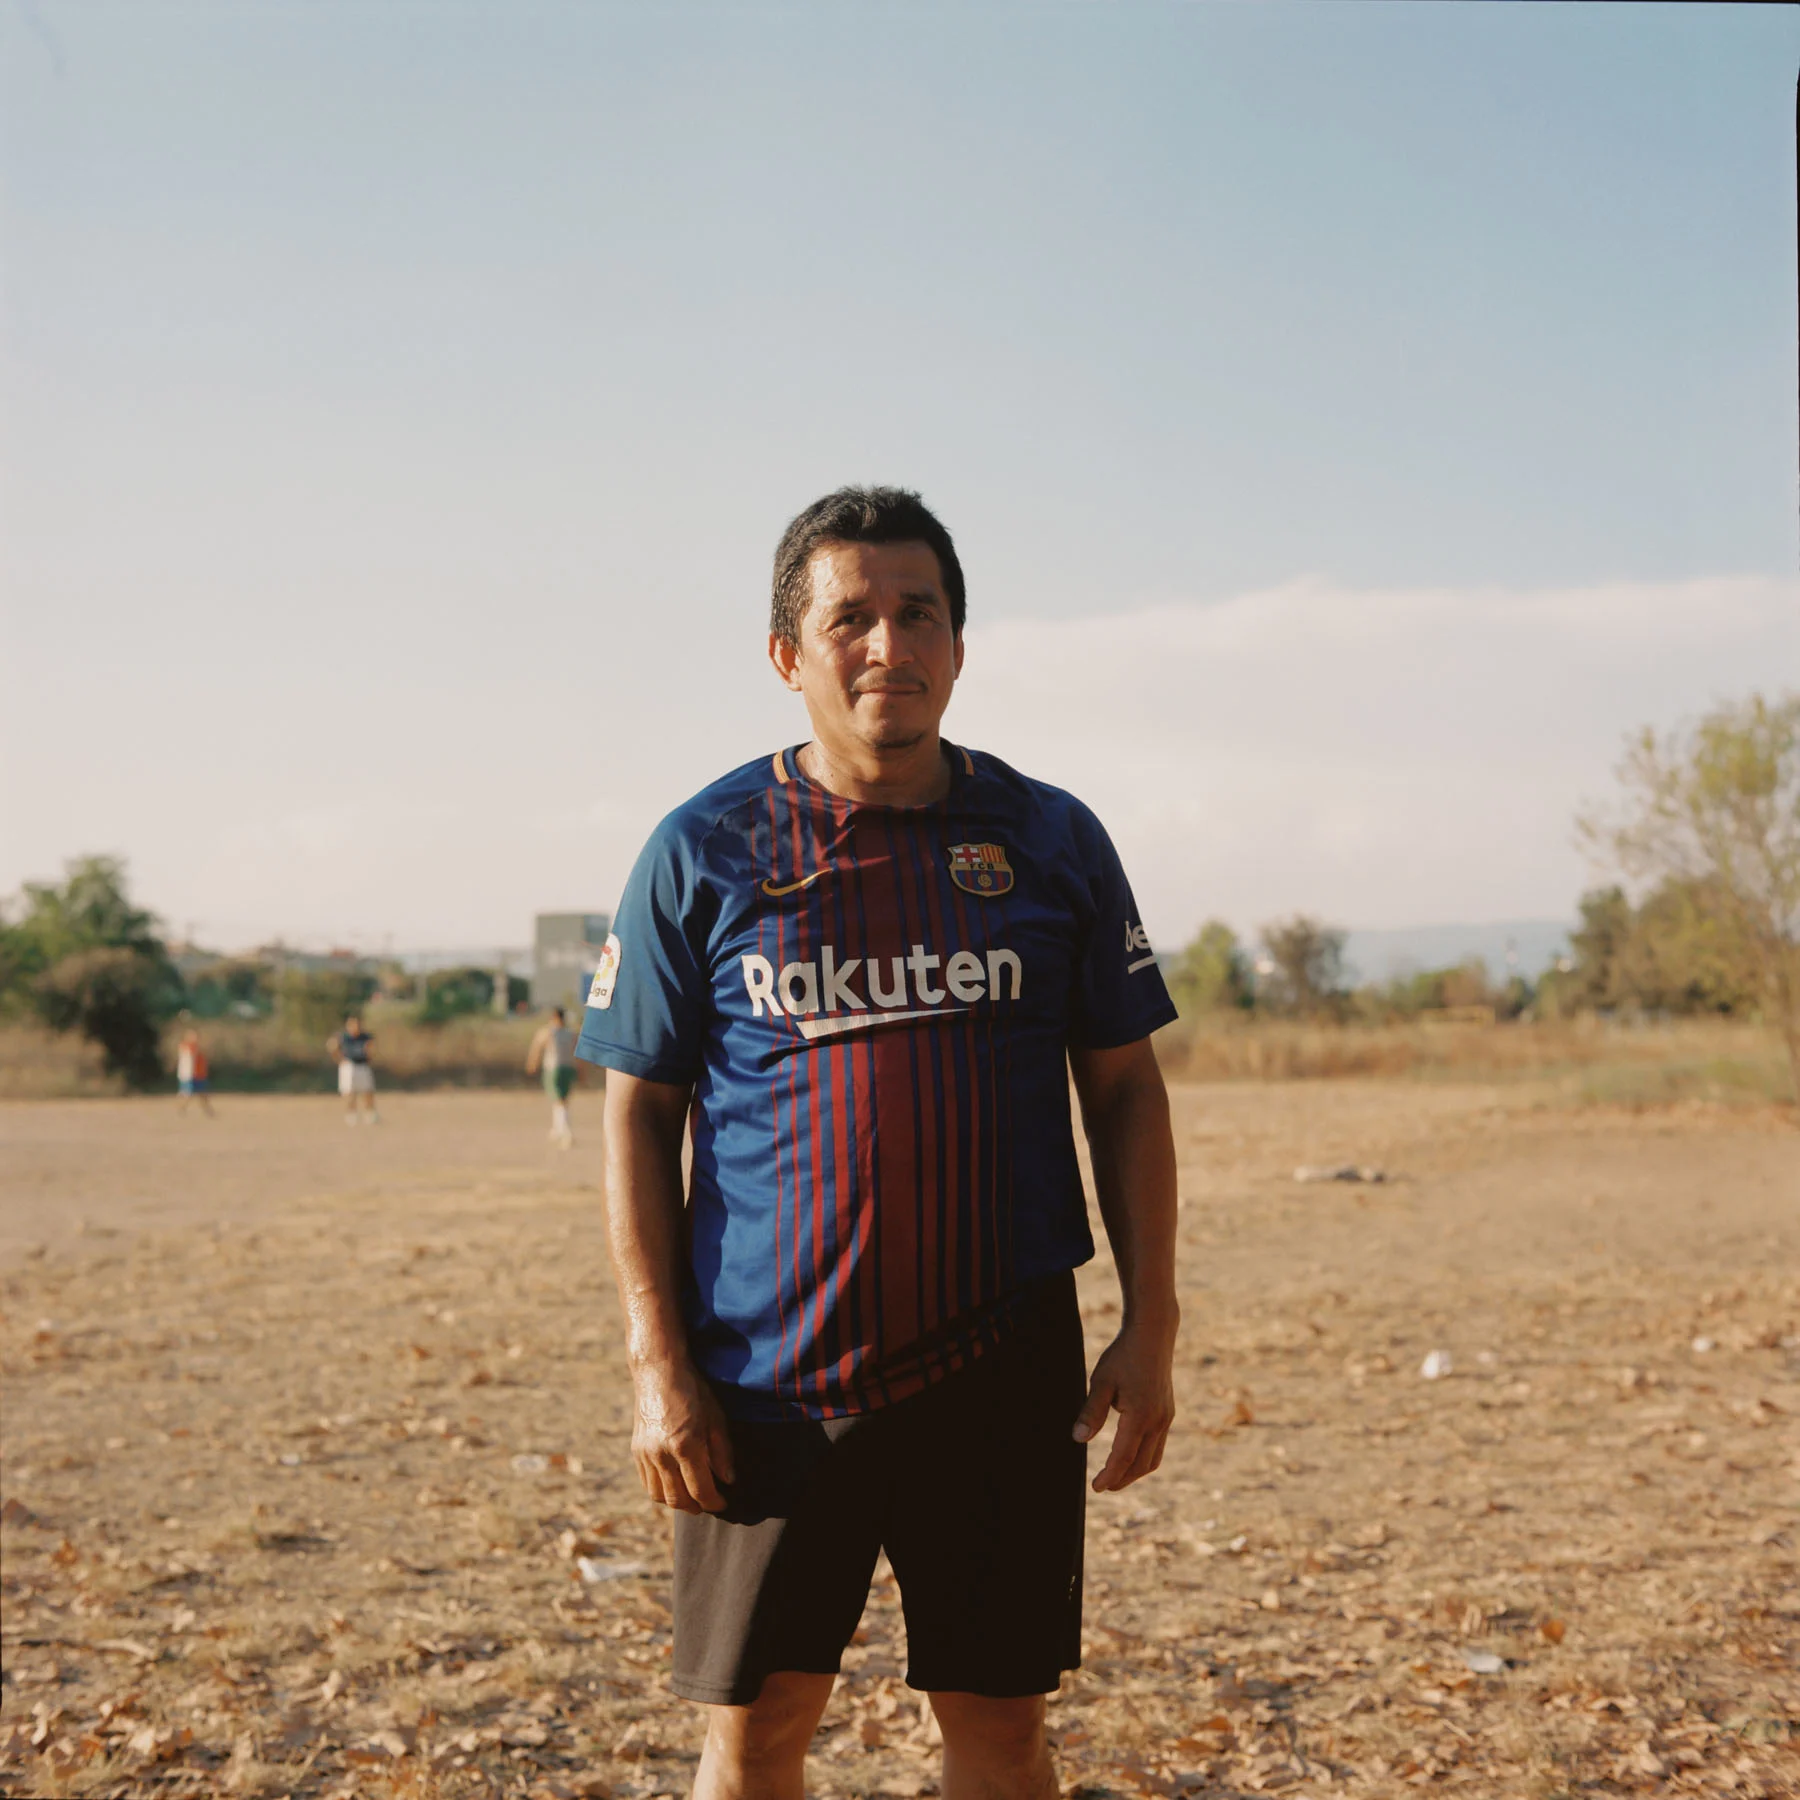 A photograph of a man posing on a soccer field. The man is wearing an FC Barcelona soccer jersey. There are other players out of focus playing in the background.